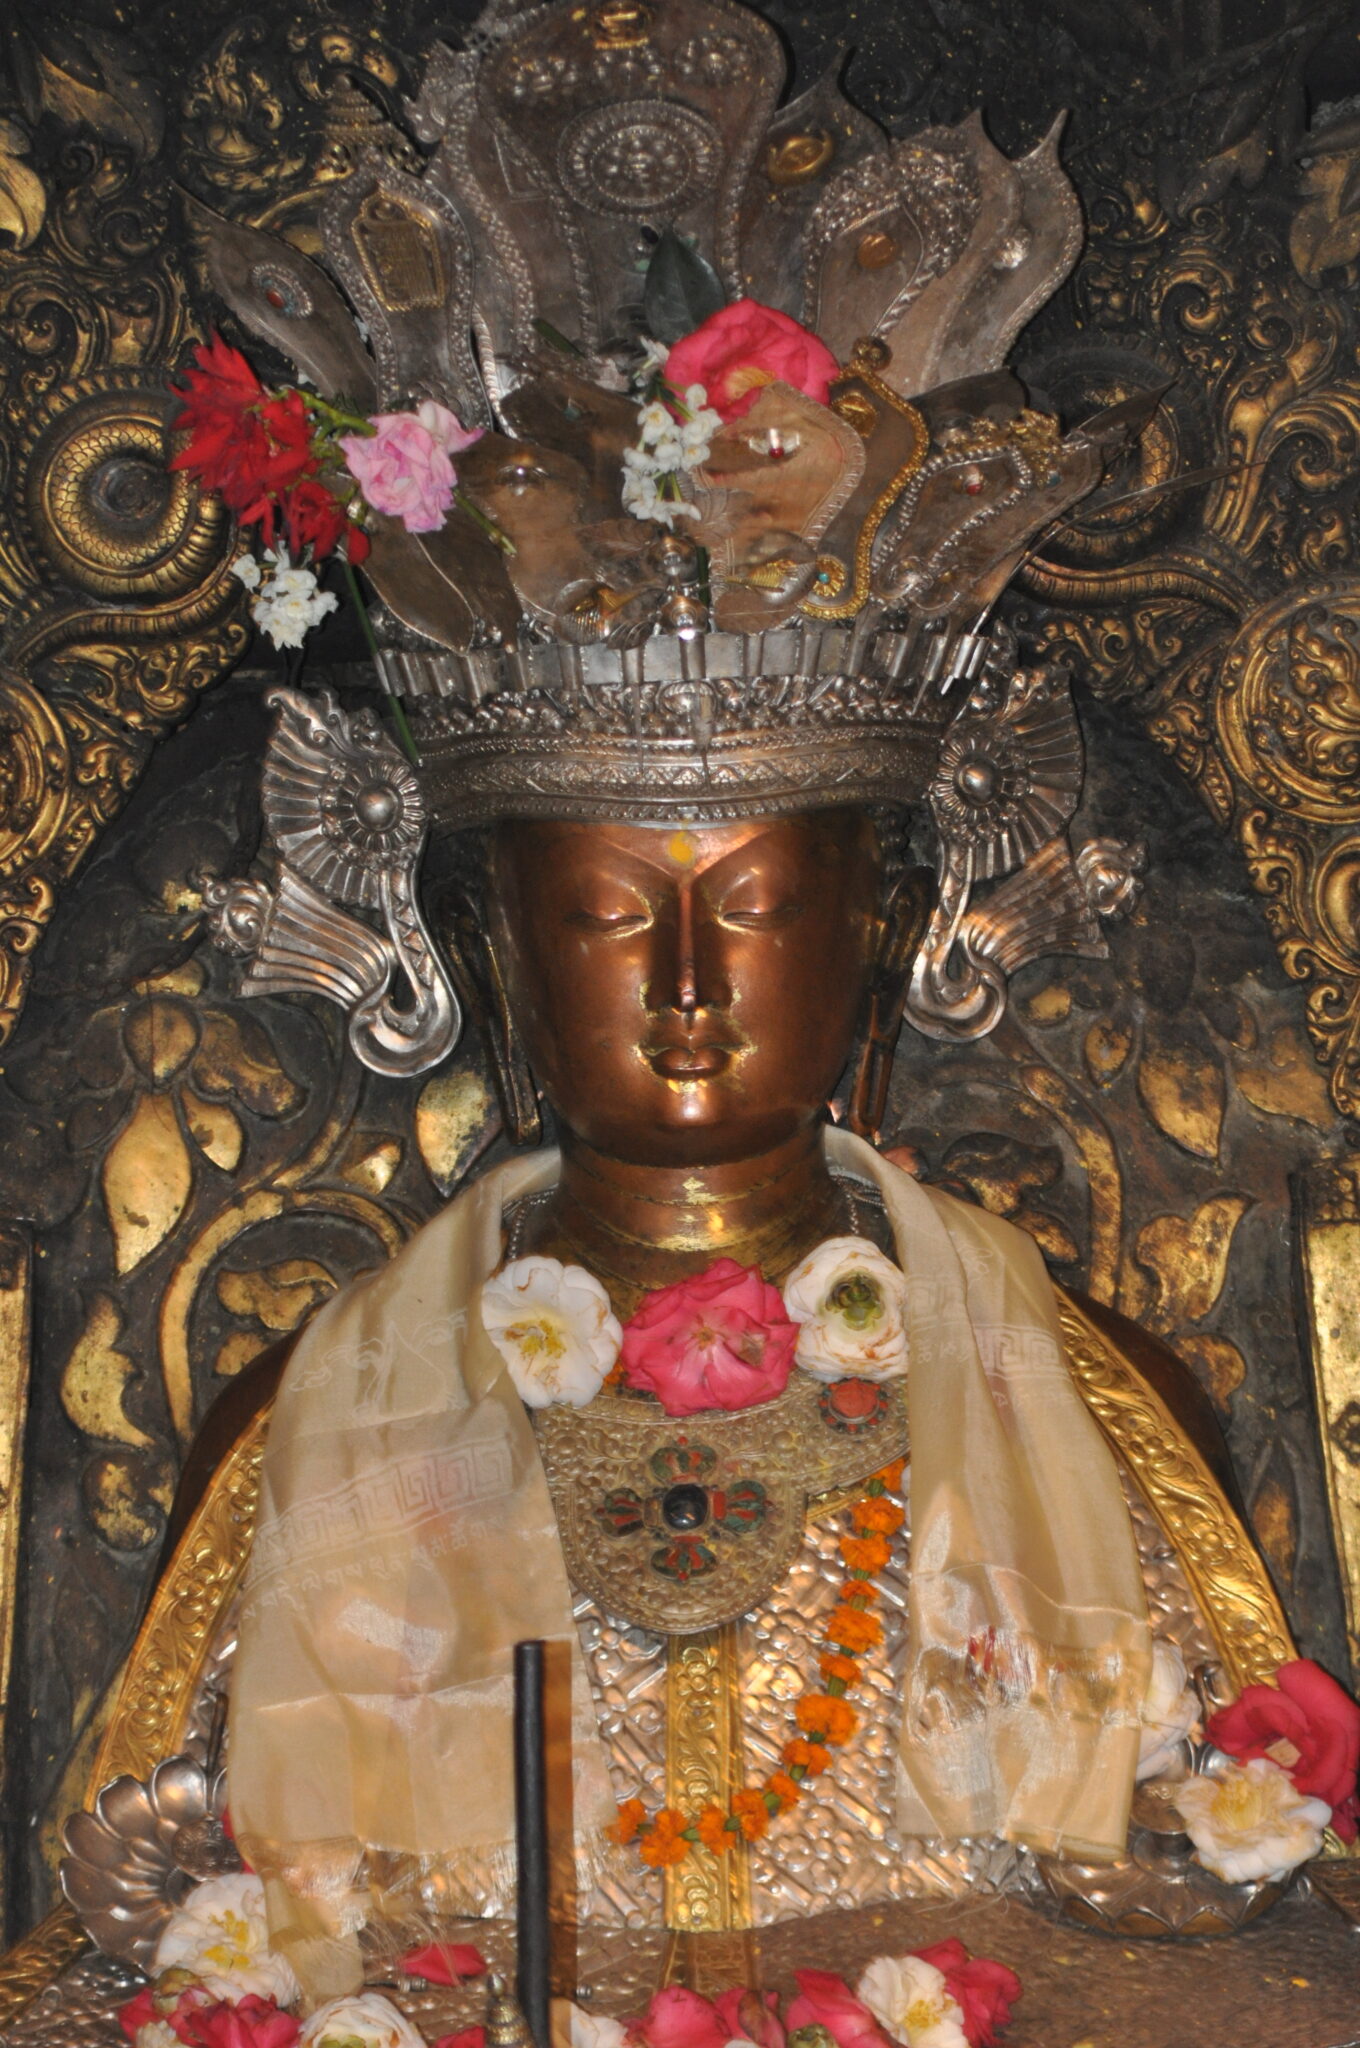 Medium view of Buddha statue's upper body with silver crown, copper face, and textile adornments